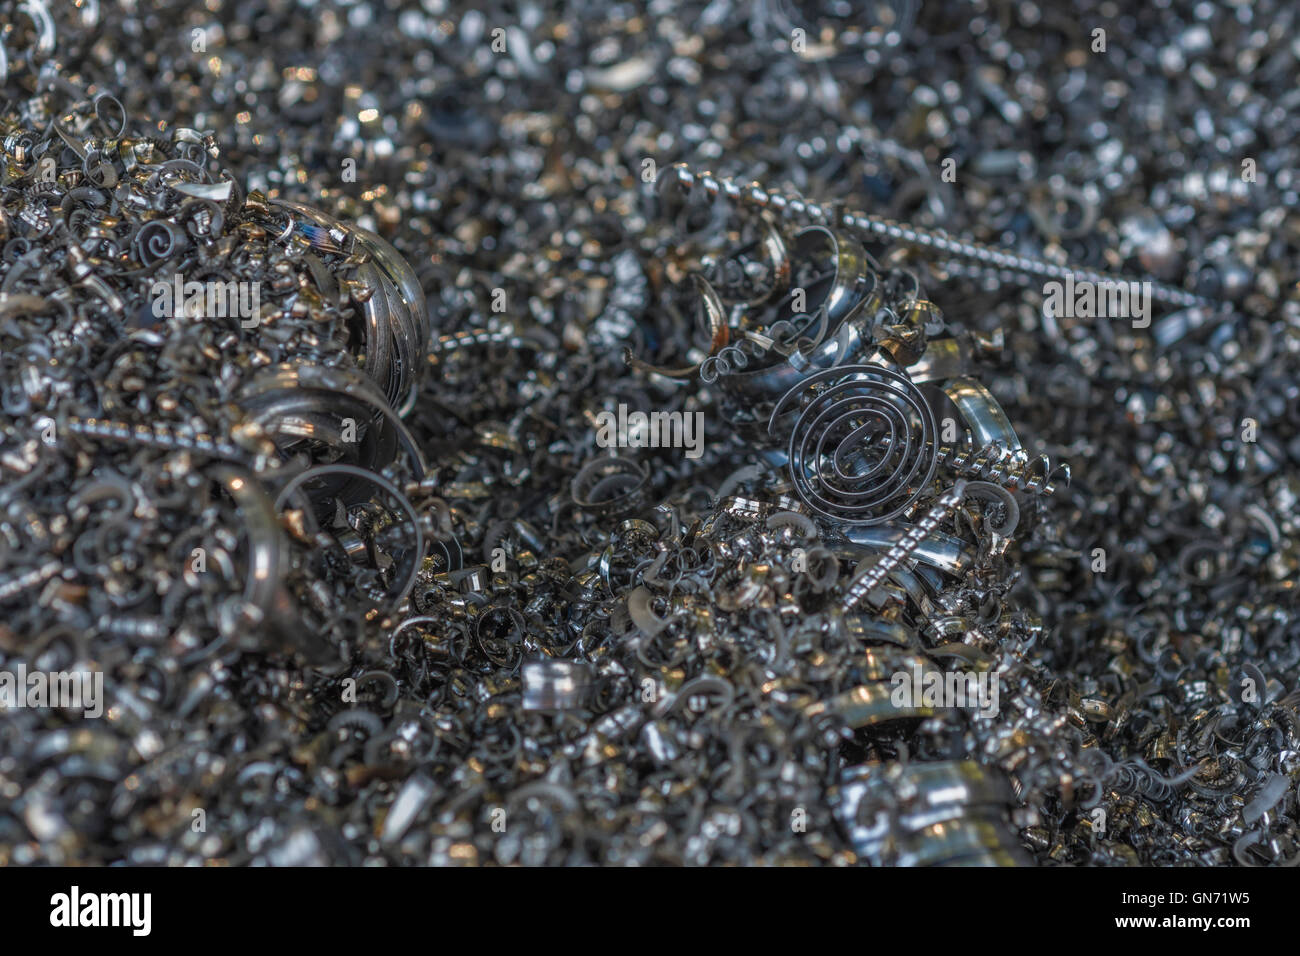 Close shot of metal turnings / industrial swarf from CNC machining operations. Industrial waste, metal waste, metal texture. Stock Photo